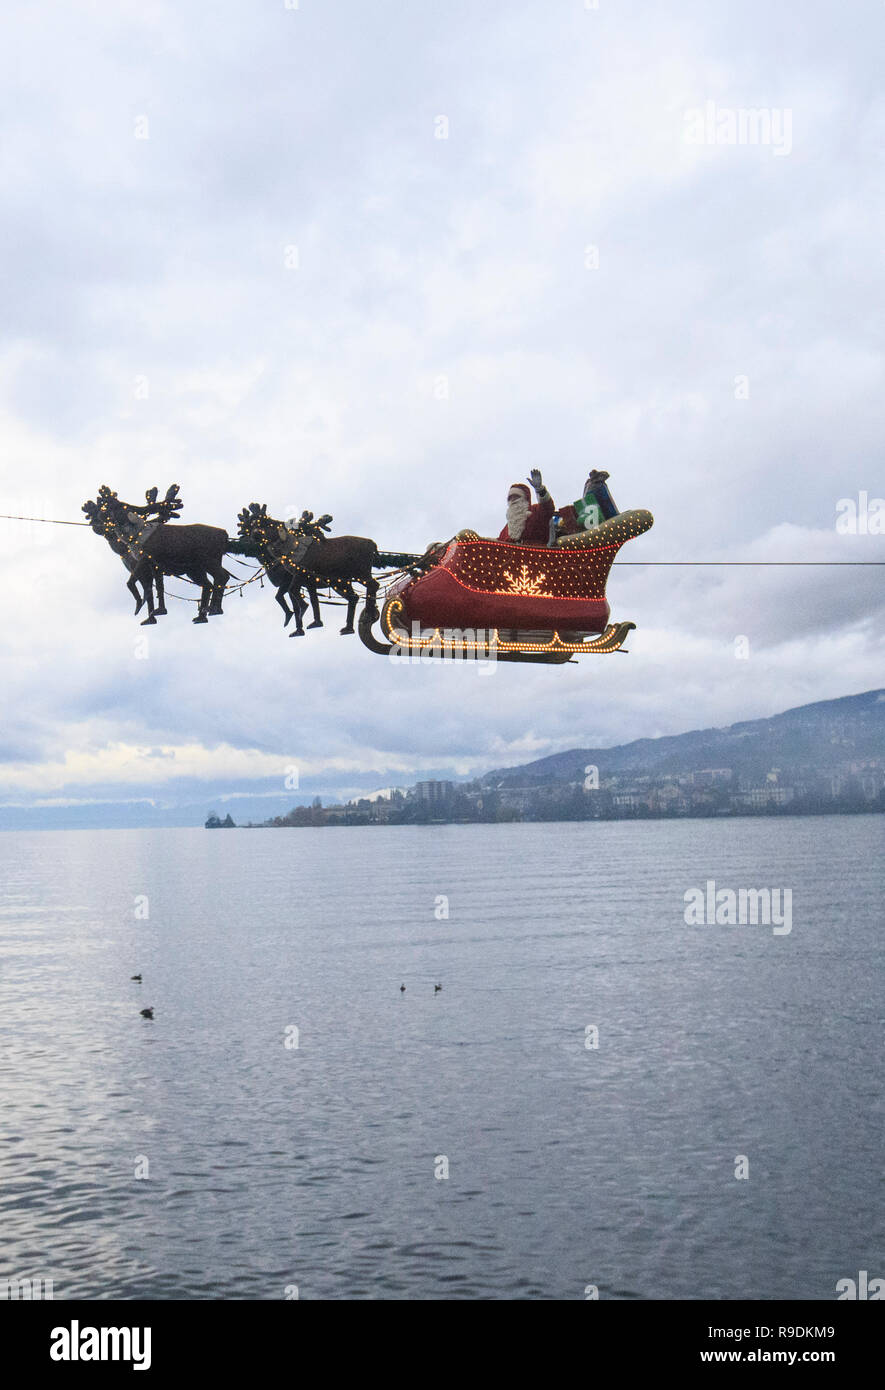 Montreux, Switzerland. 22nd Dec, 2018. A 'Santa Claus' waves to the crowd from his flying sleigh drawn by 'reindeers' over Lake Leman at sunset in Montreux, Switzerland, on Dec. 22, 2018. The flying Santa Claus stunt show is part of promotional activities by the Christmas market in Montreux, which is one of the most famous and biggest markets of its kind in Switzerland. Credit: Xu Jinquan/Xinhua/Alamy Live News Stock Photo